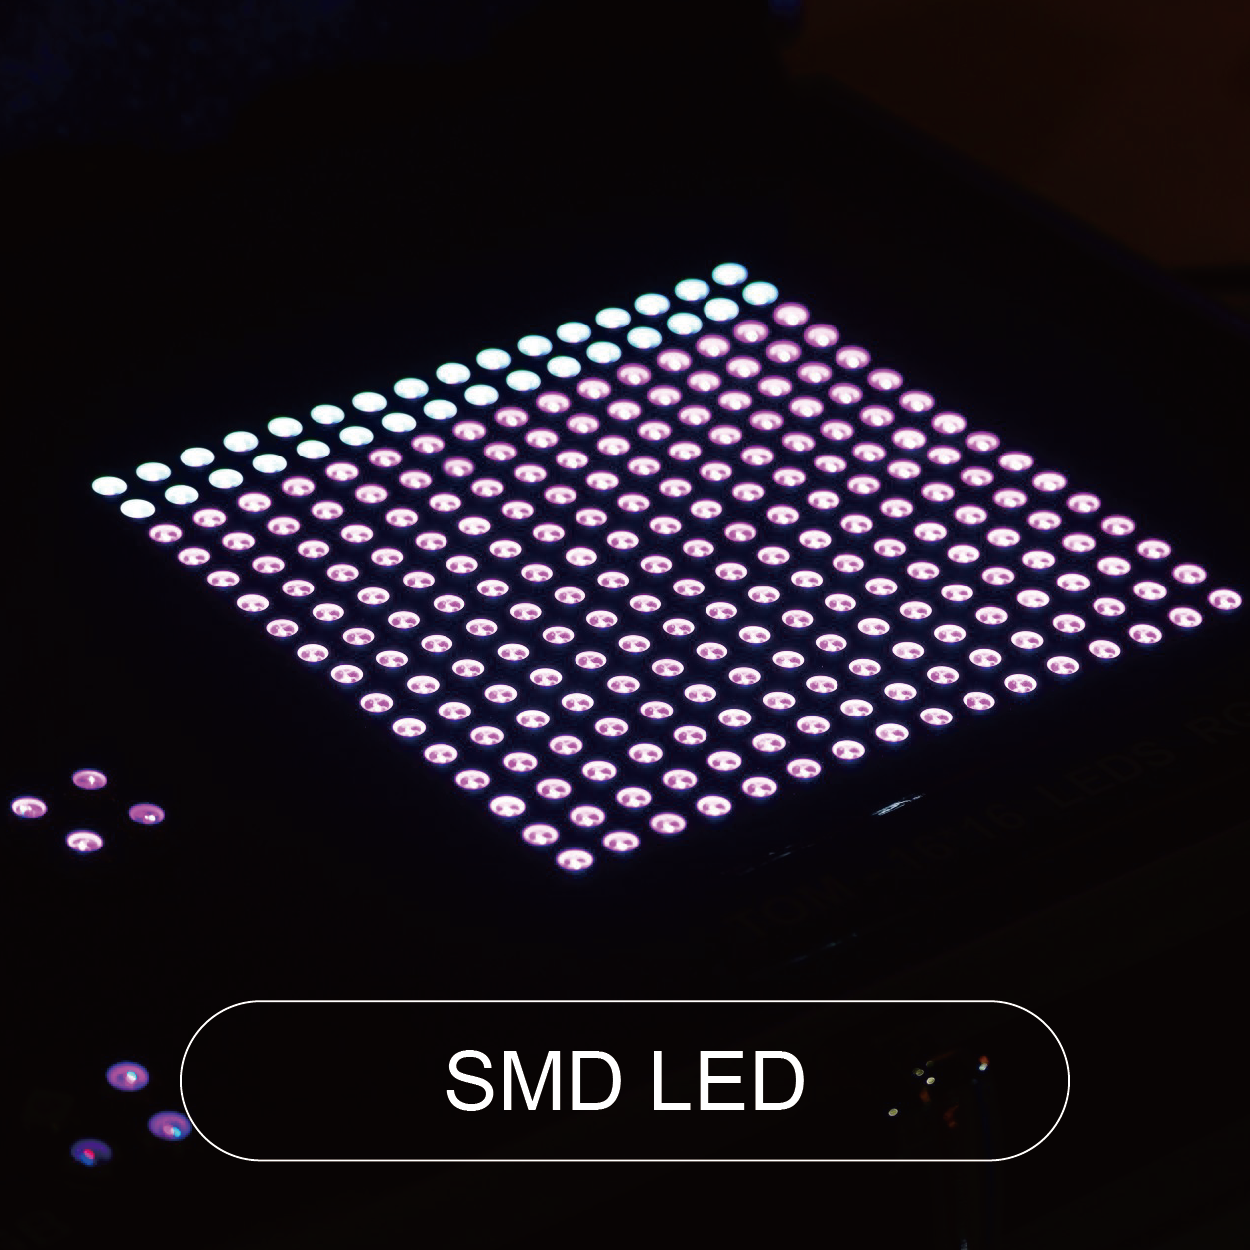 Introduction to SMD LED, What are SMD LEDs? - Oasistek